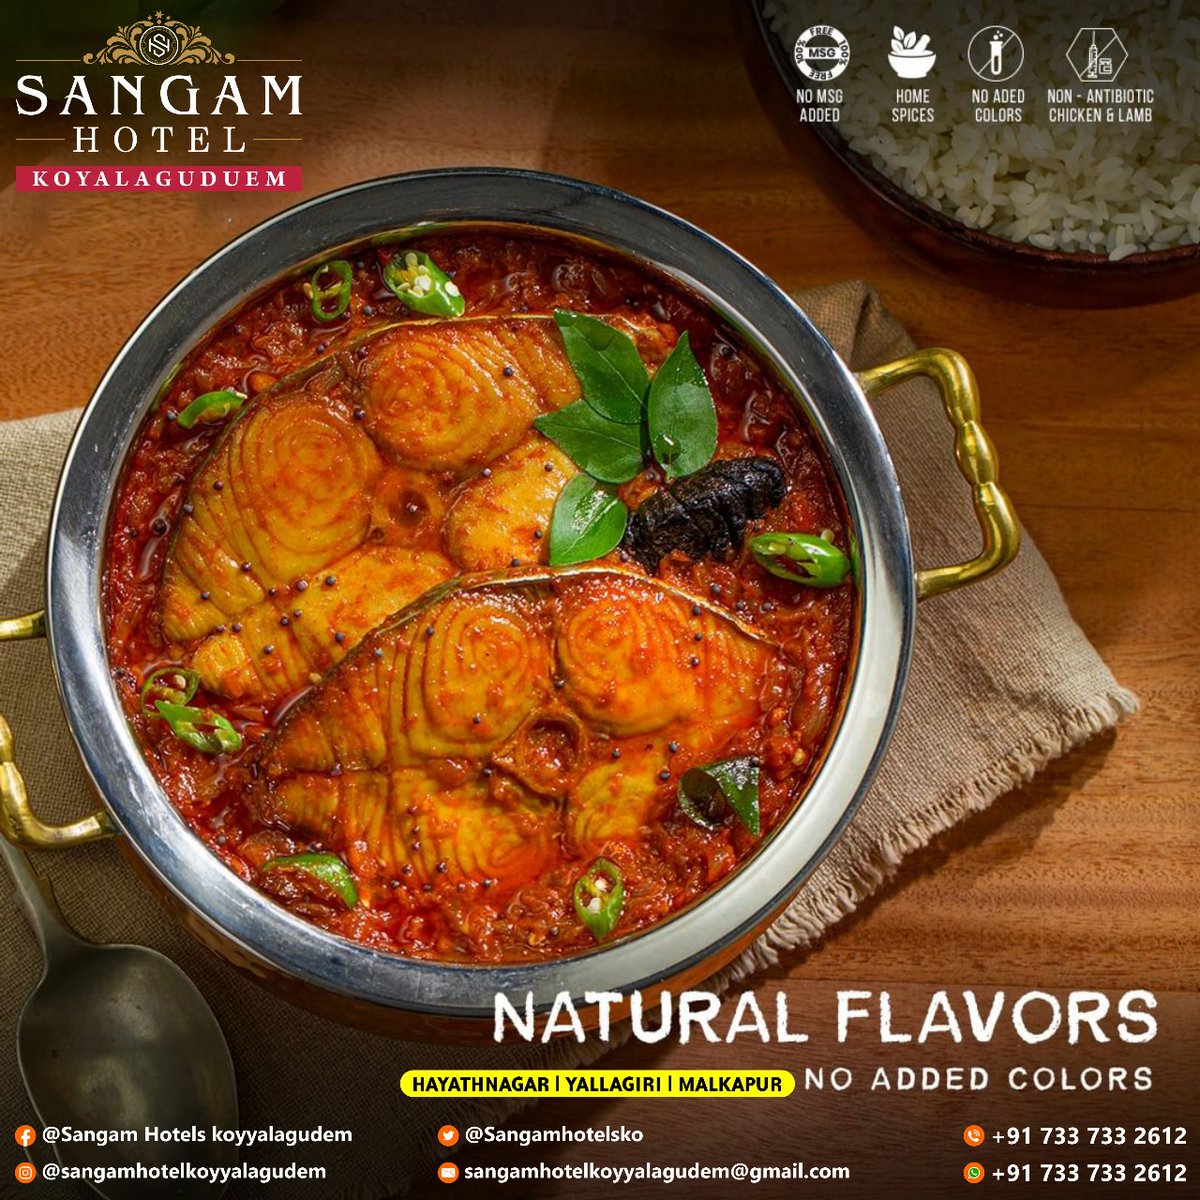 Natural Flavors No Added Colors!! @sangamhotelsko

#fishcurry #fish #fishfry #foodie #food #foodphotography #foodporn #indianfood #foodblogger #seafood #instafood #foodstagram #fishlover #foodlover #bengalifood #prawns #curry #lunch #yummy #homemade #dinner #foodgasm